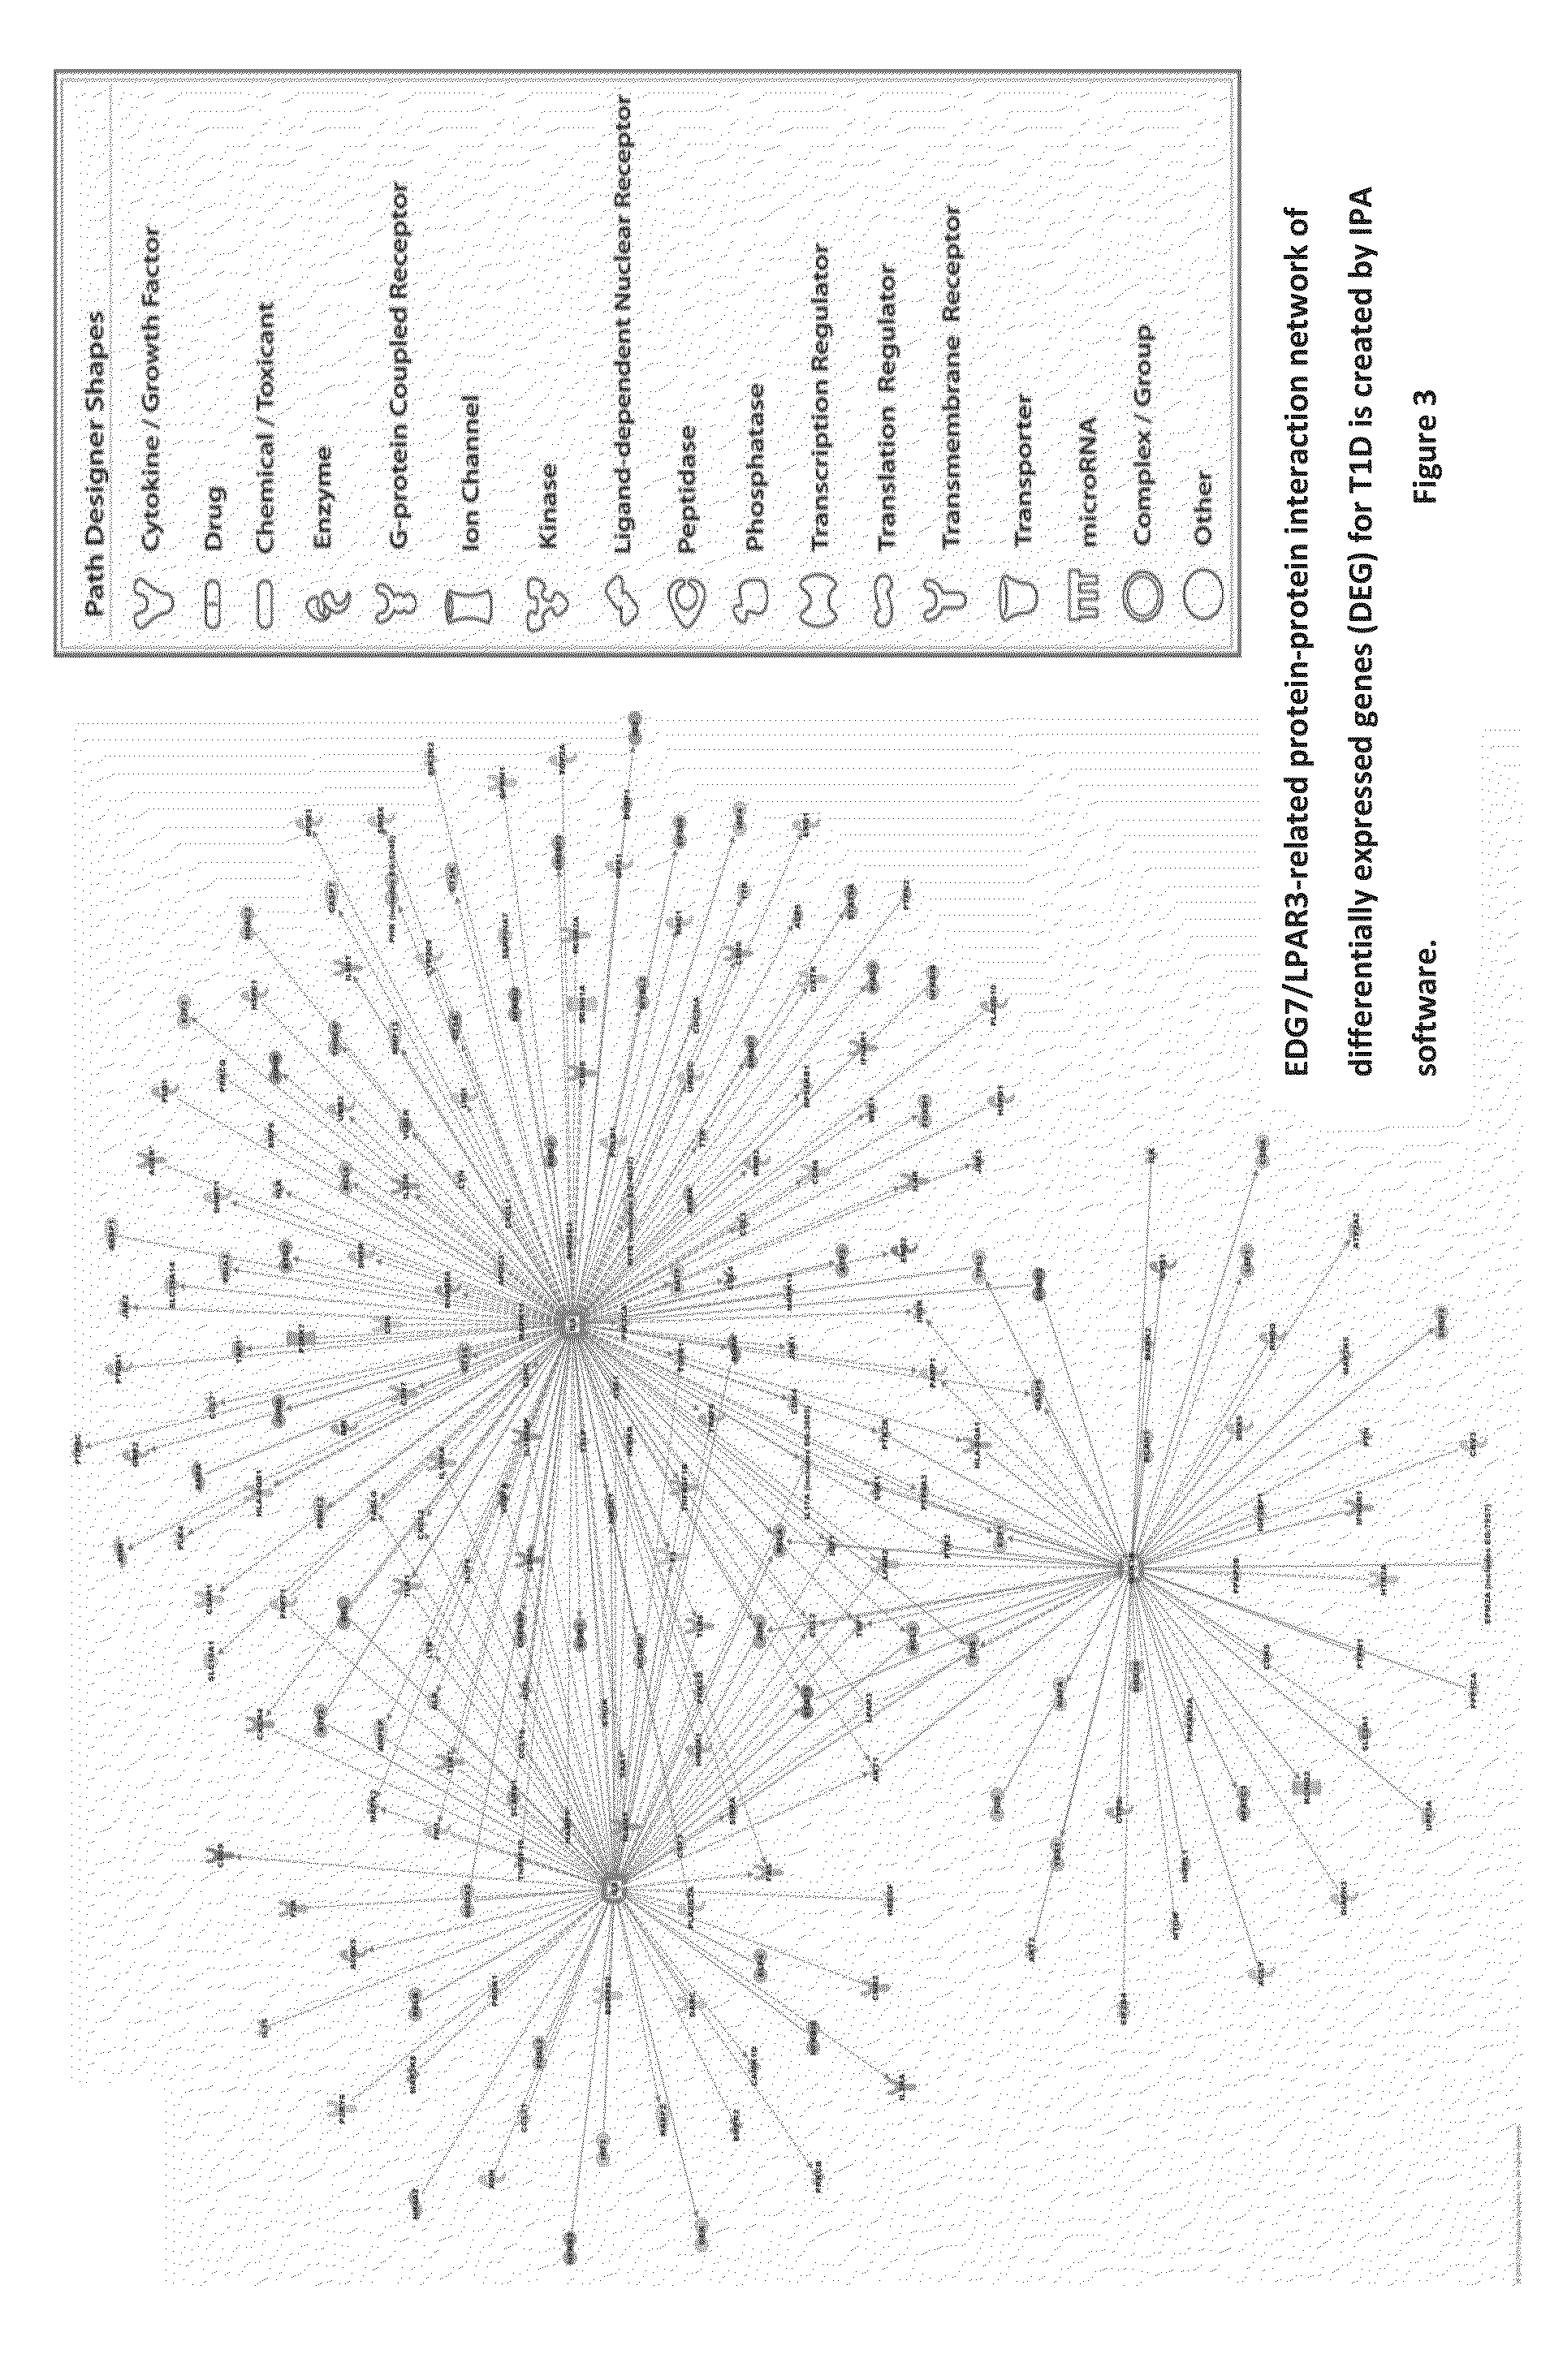 Genetic Alterations on Chromosomes 21Q, 6Q and 15Q and Methods of Use Thereof for the Diagnosis and Treatment of Type 1 Diabetes